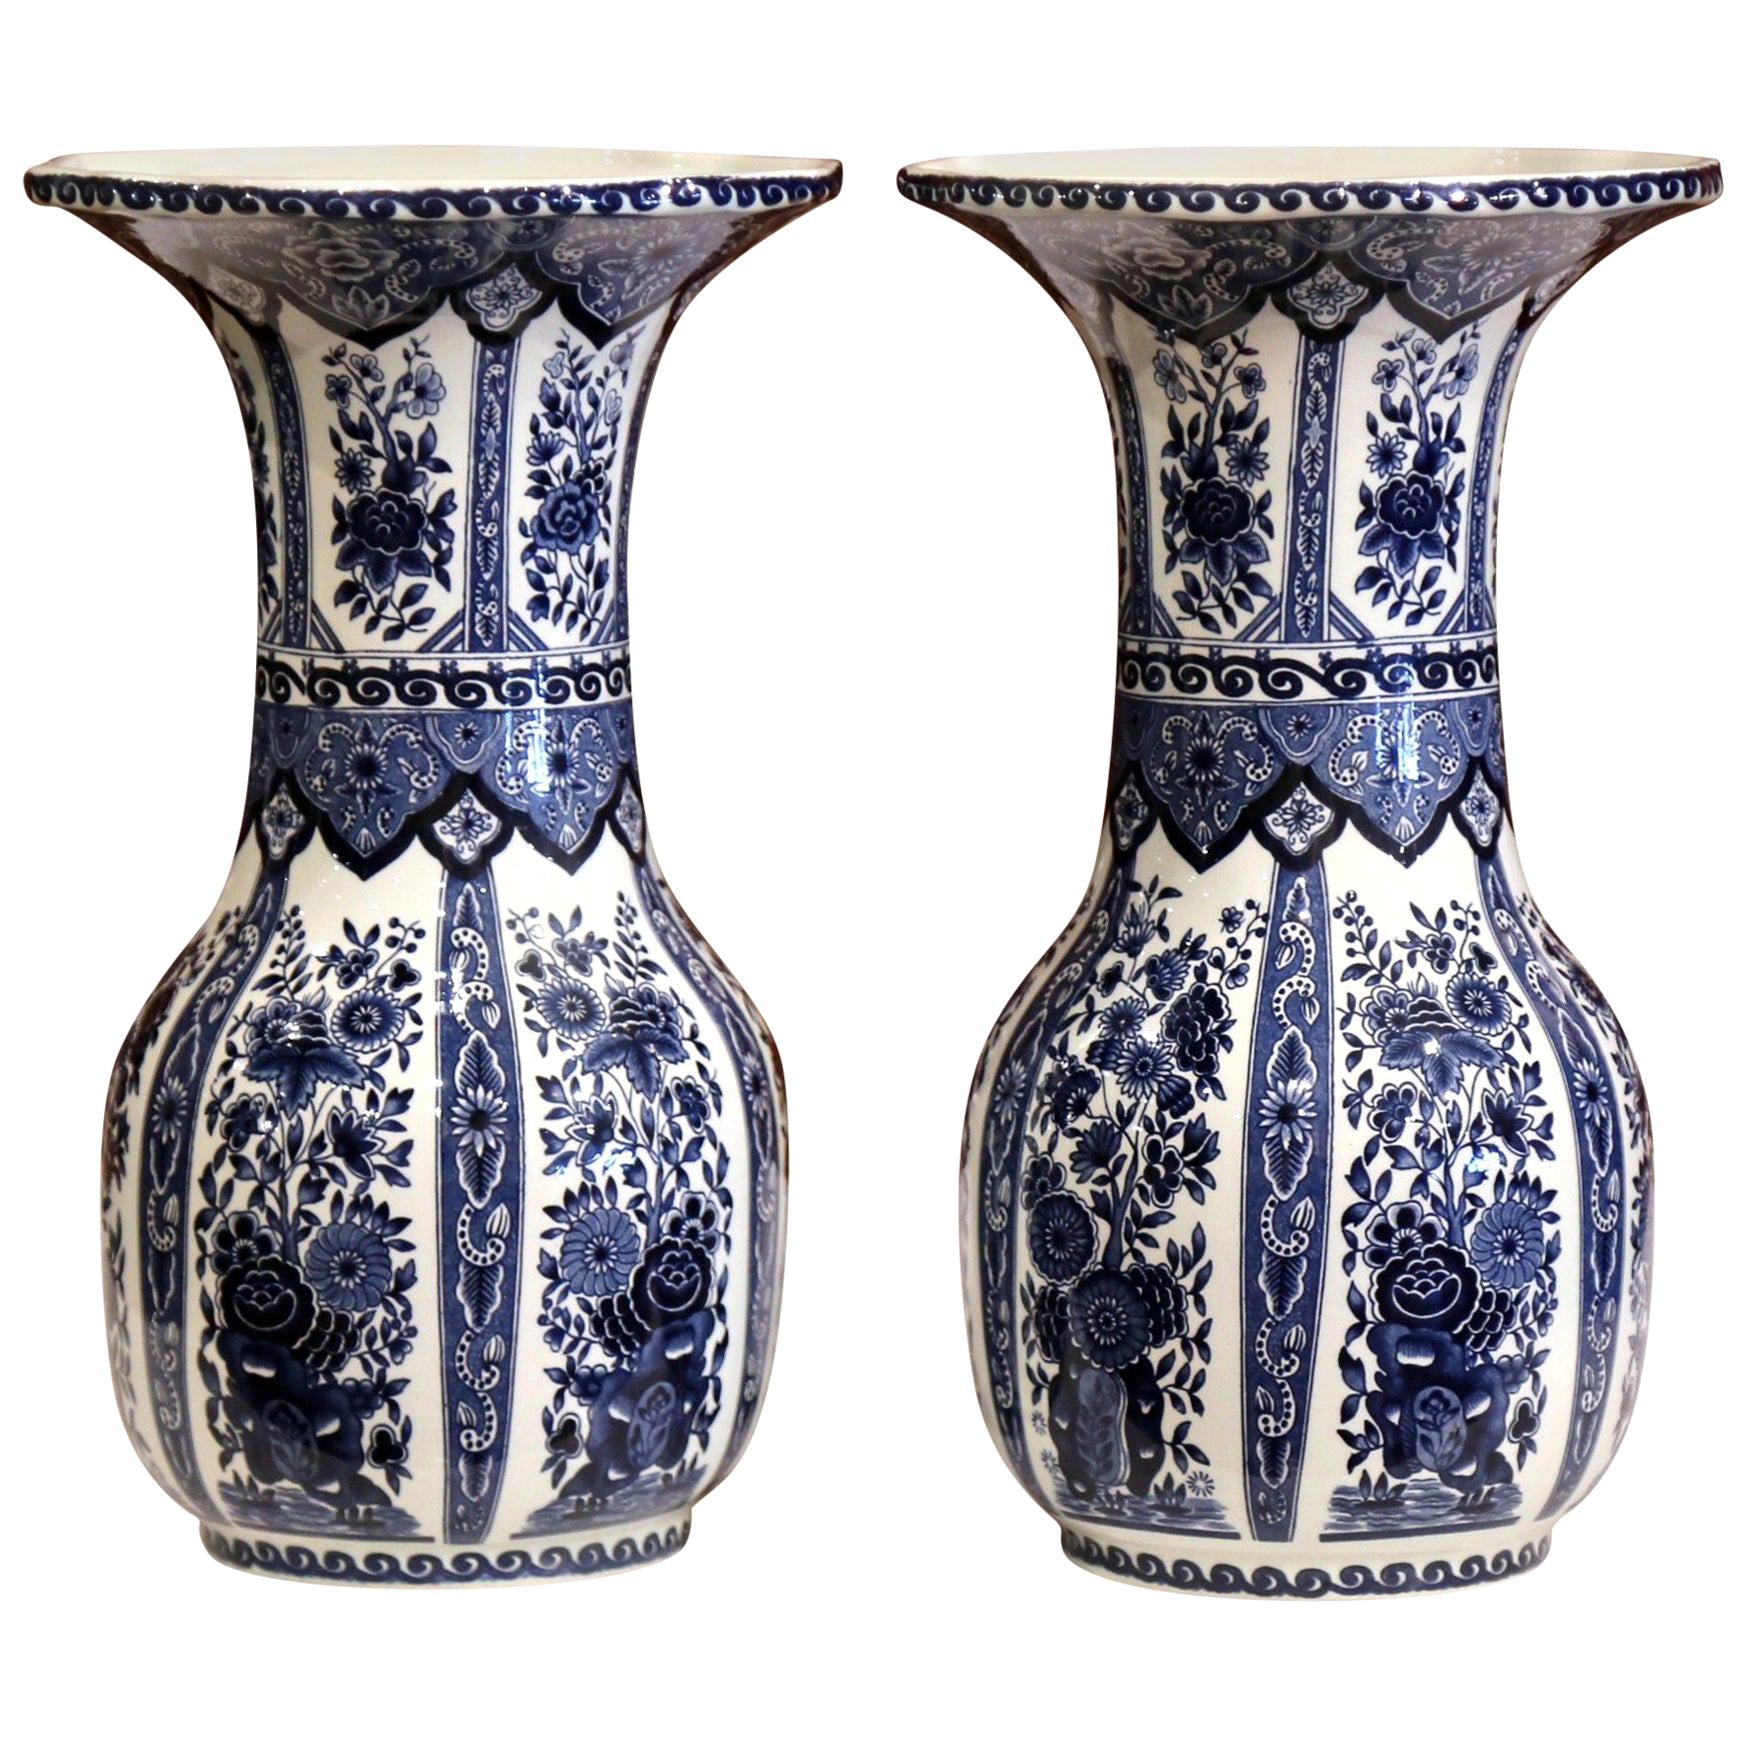 Pair of Mid-20th Century Belgium Blue and White Painted Faience Delft Vases